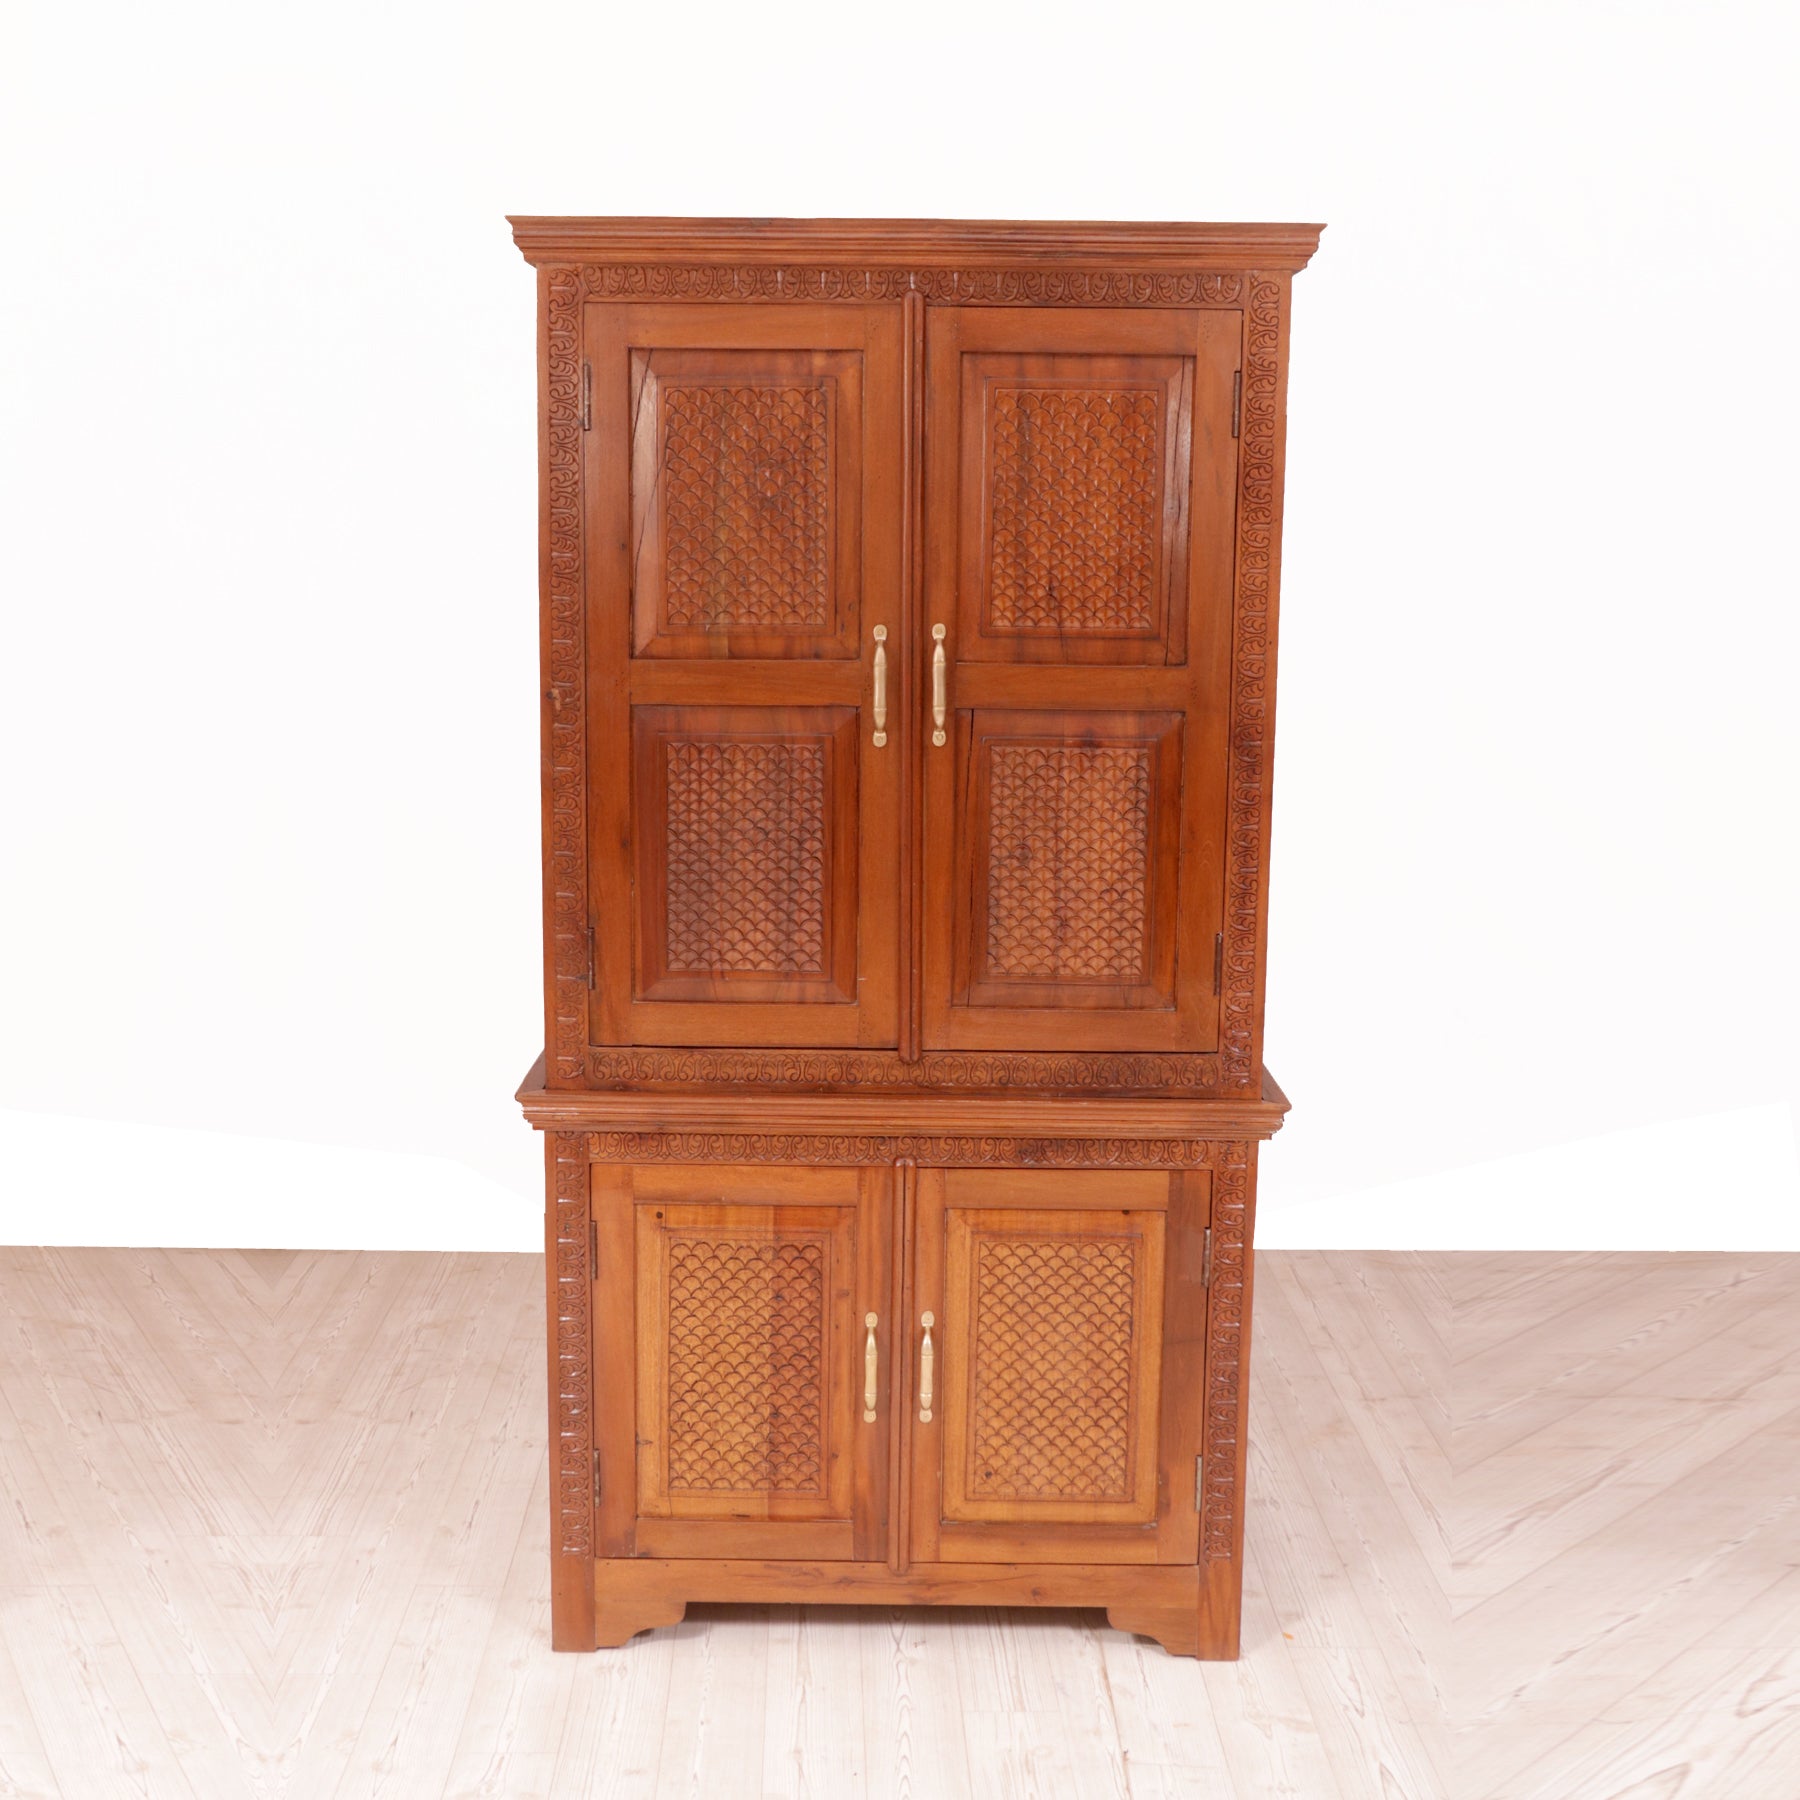 Traditional Hand-Carved Wooden Wardrobe Wardrobe